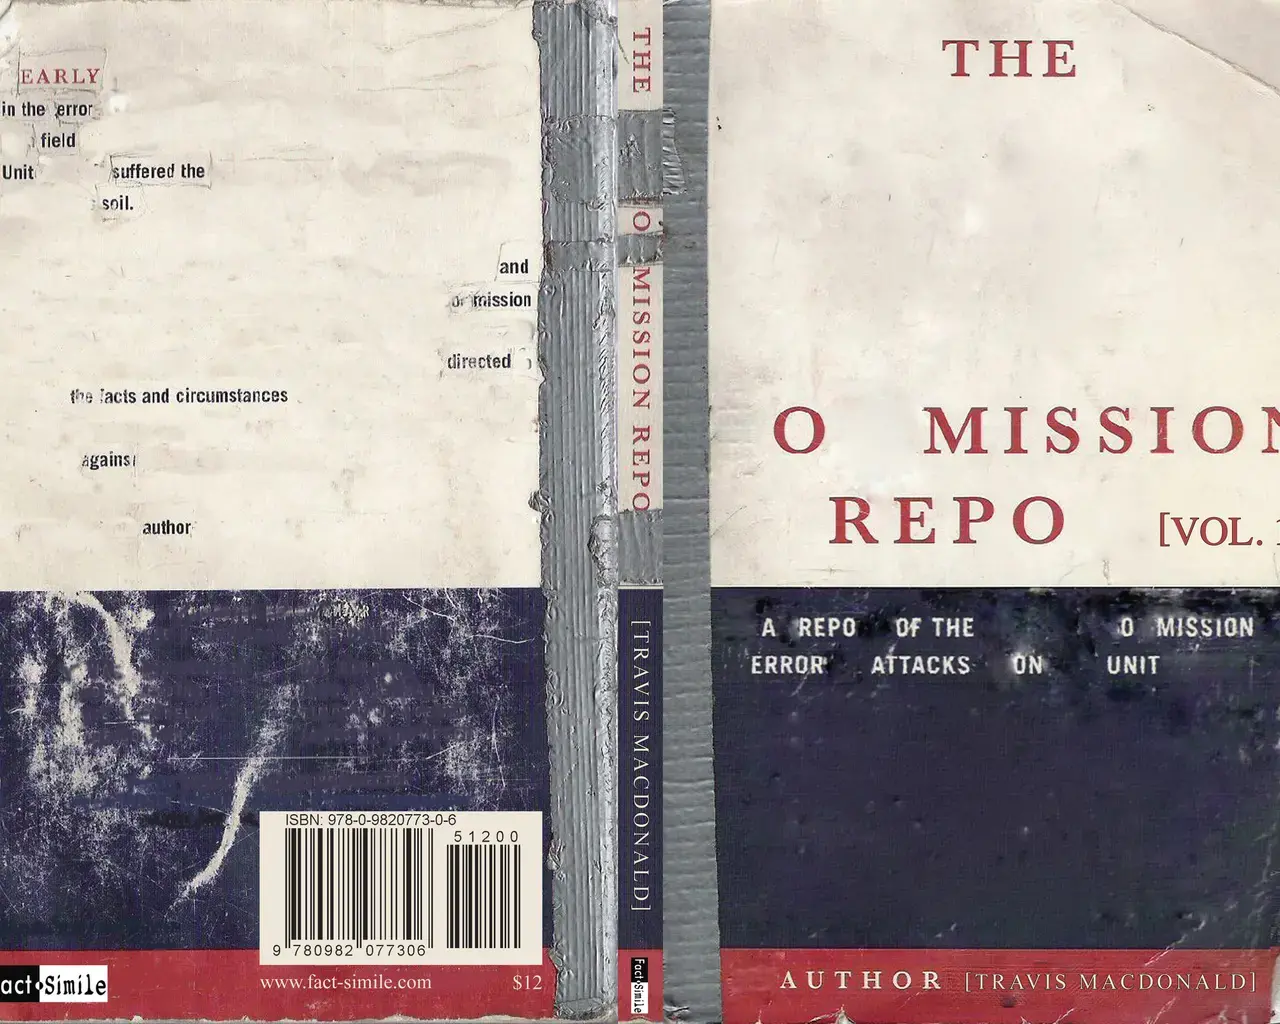 Cover of Travis Macdonald&#39;s The O Mission Repo (Fact-Simile Editions, 2008).